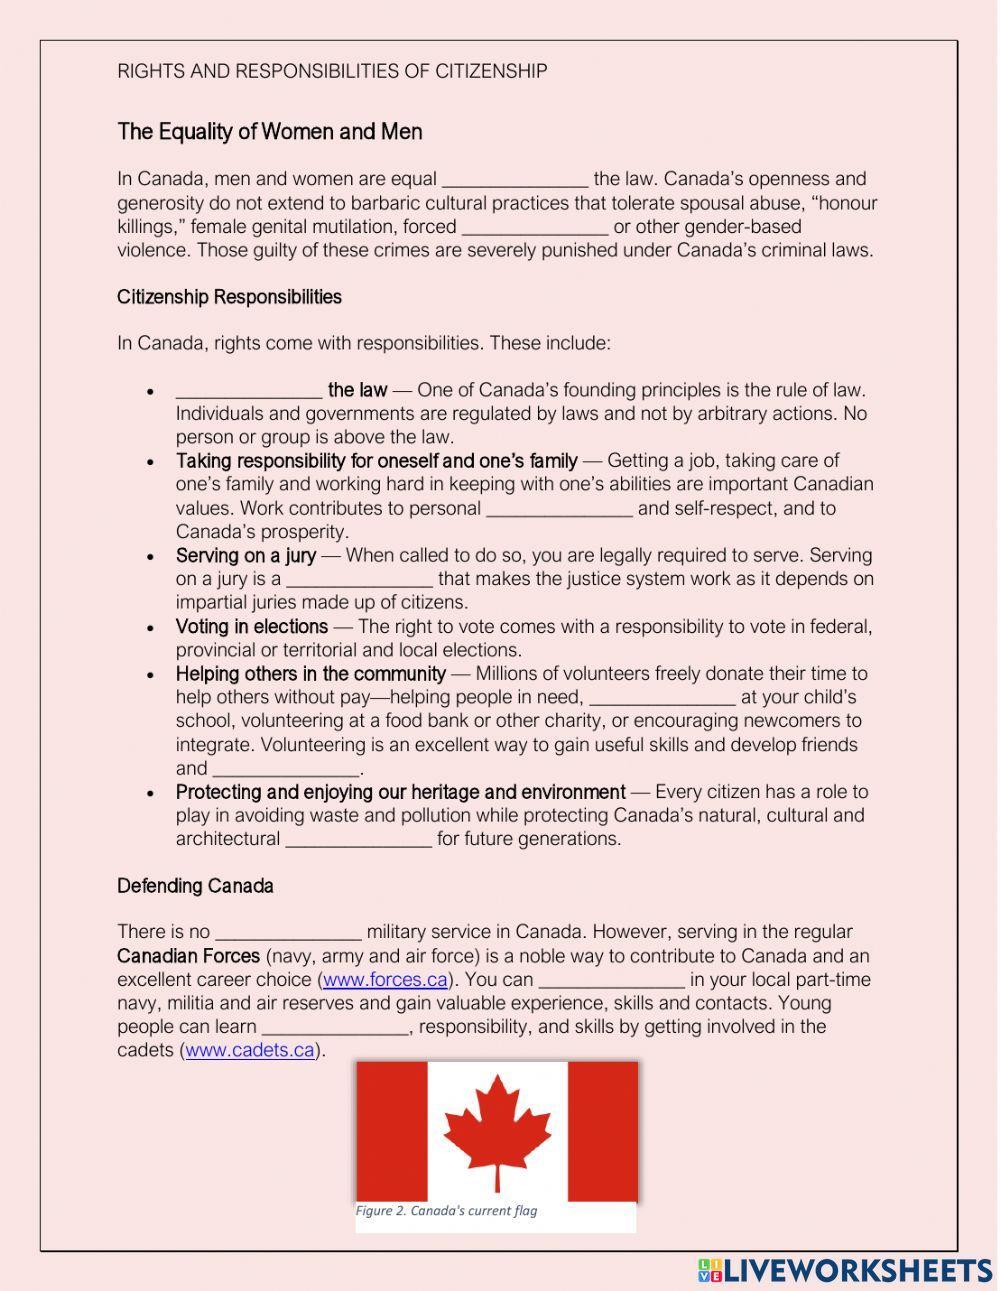 Rights and Responsibilities of Canadian Citizenship